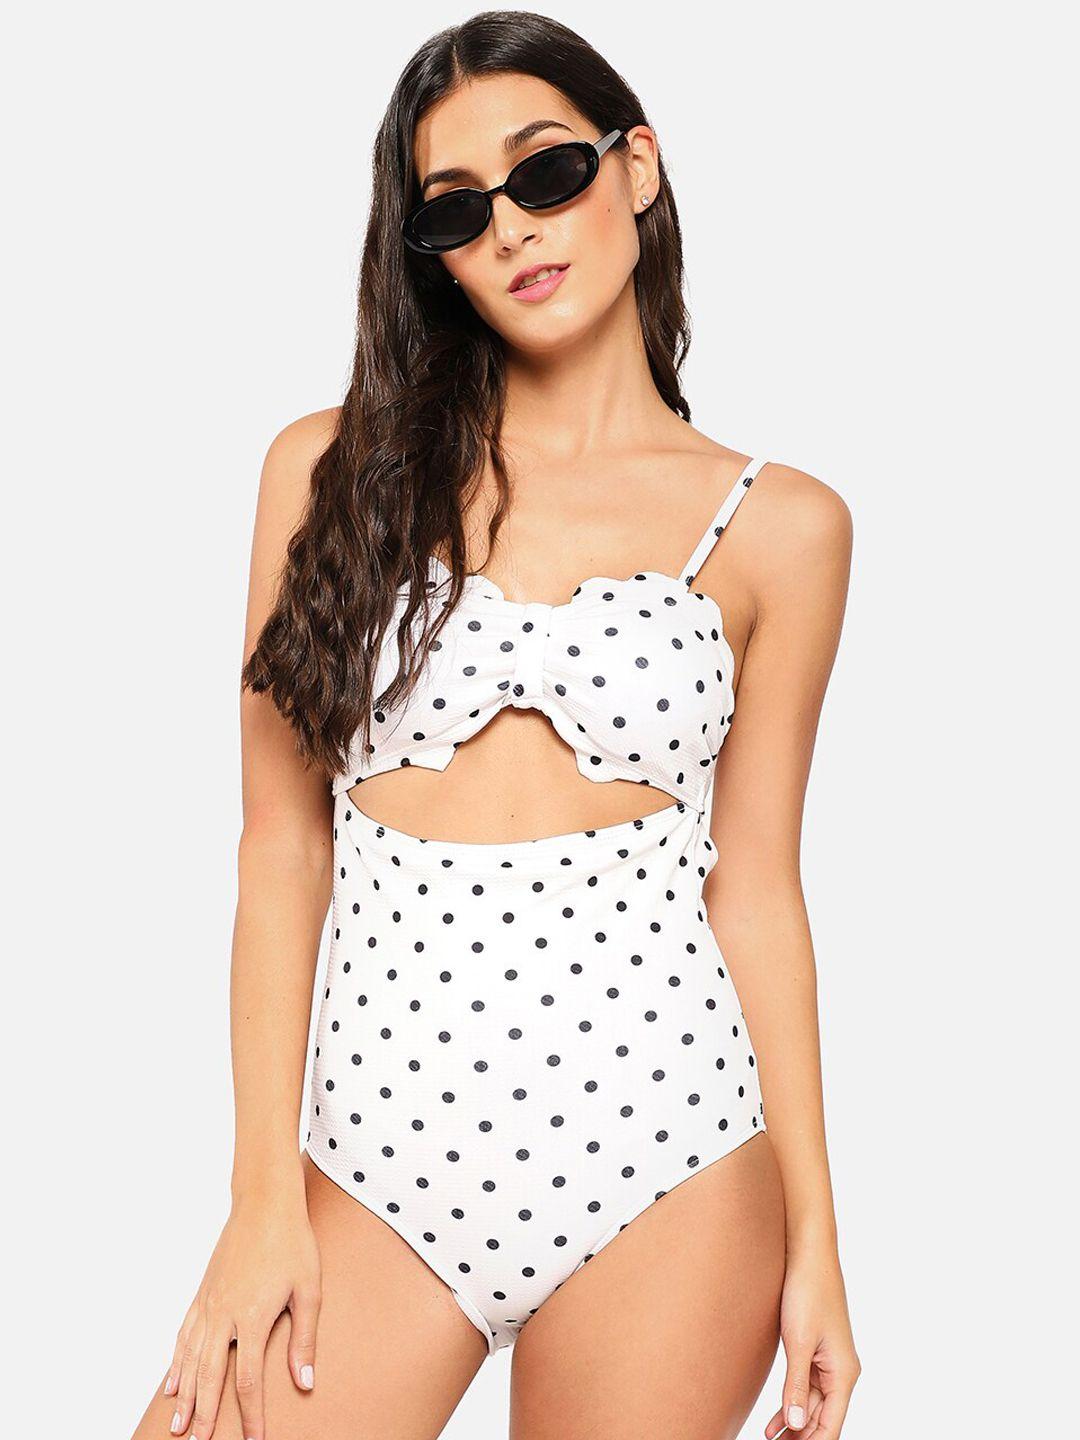 haute sauce by  campus sutra women polka dot printed one-piece swimsuit